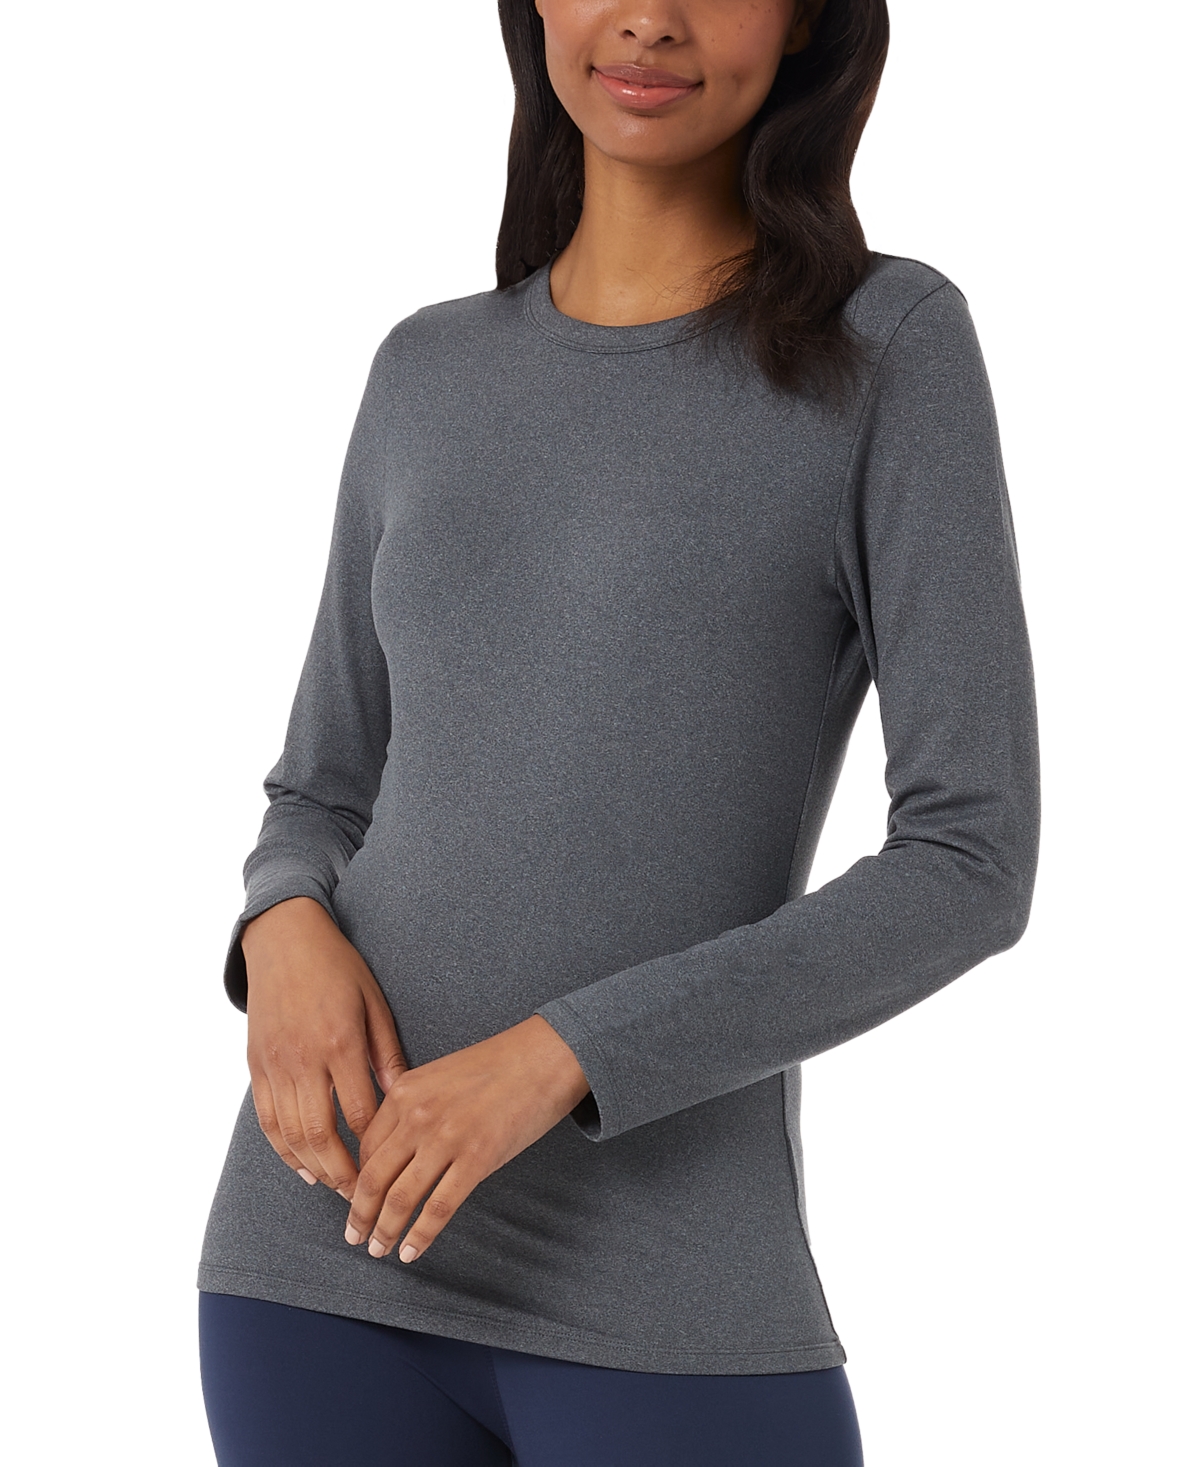 32 Degrees Women's Easy Wear Crewneck Top In Ht Charcoal